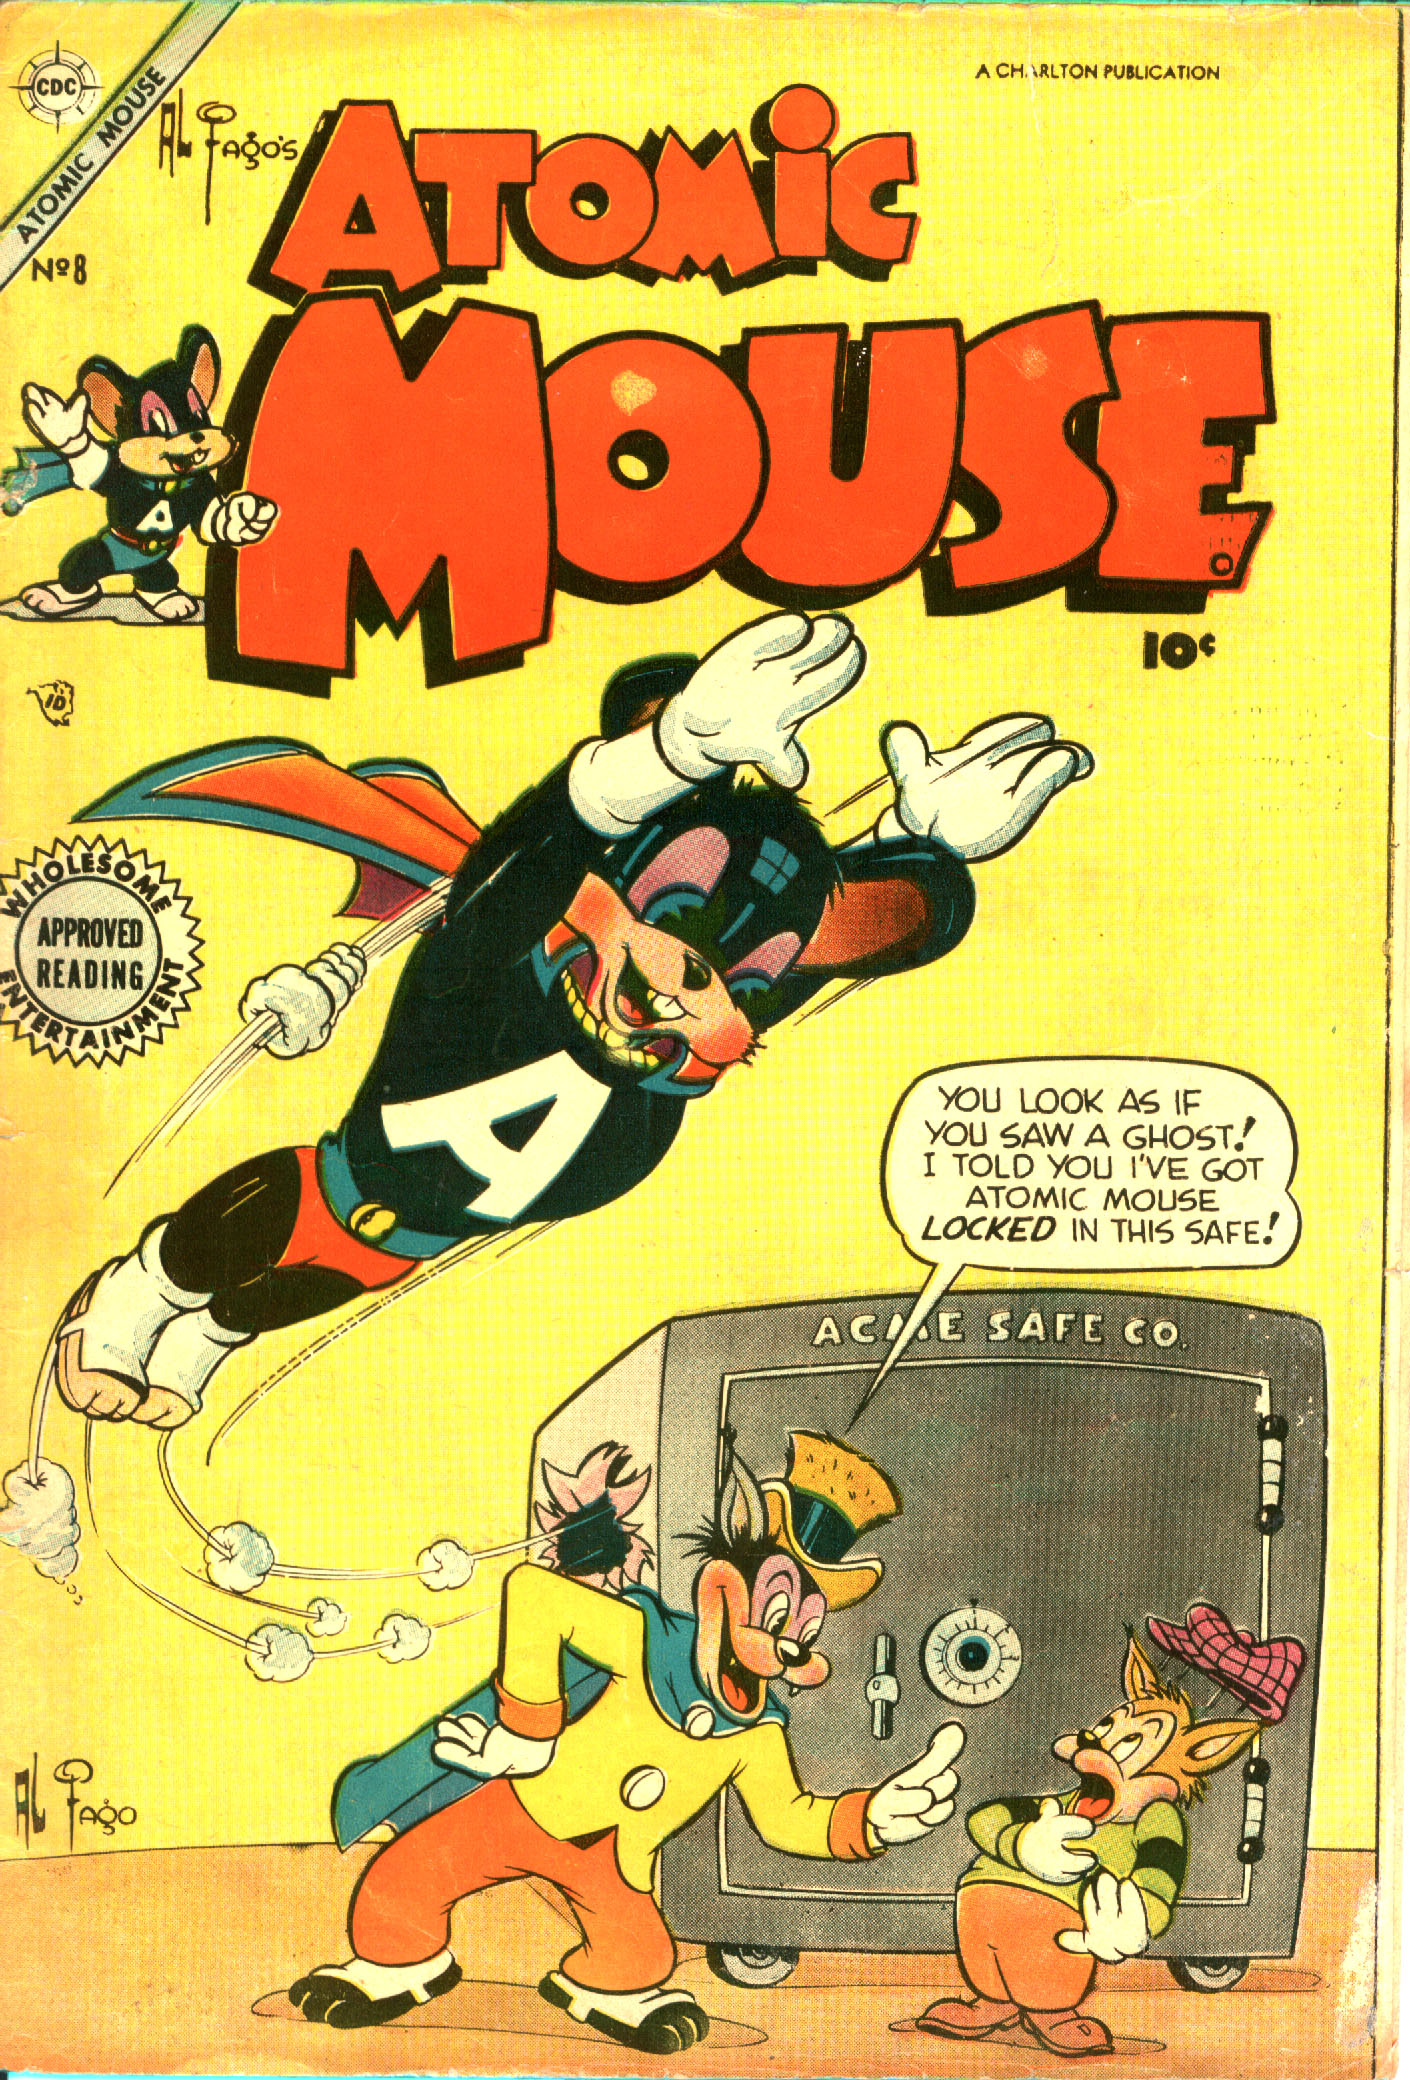 Read online Atomic Mouse comic -  Issue #8 - 1